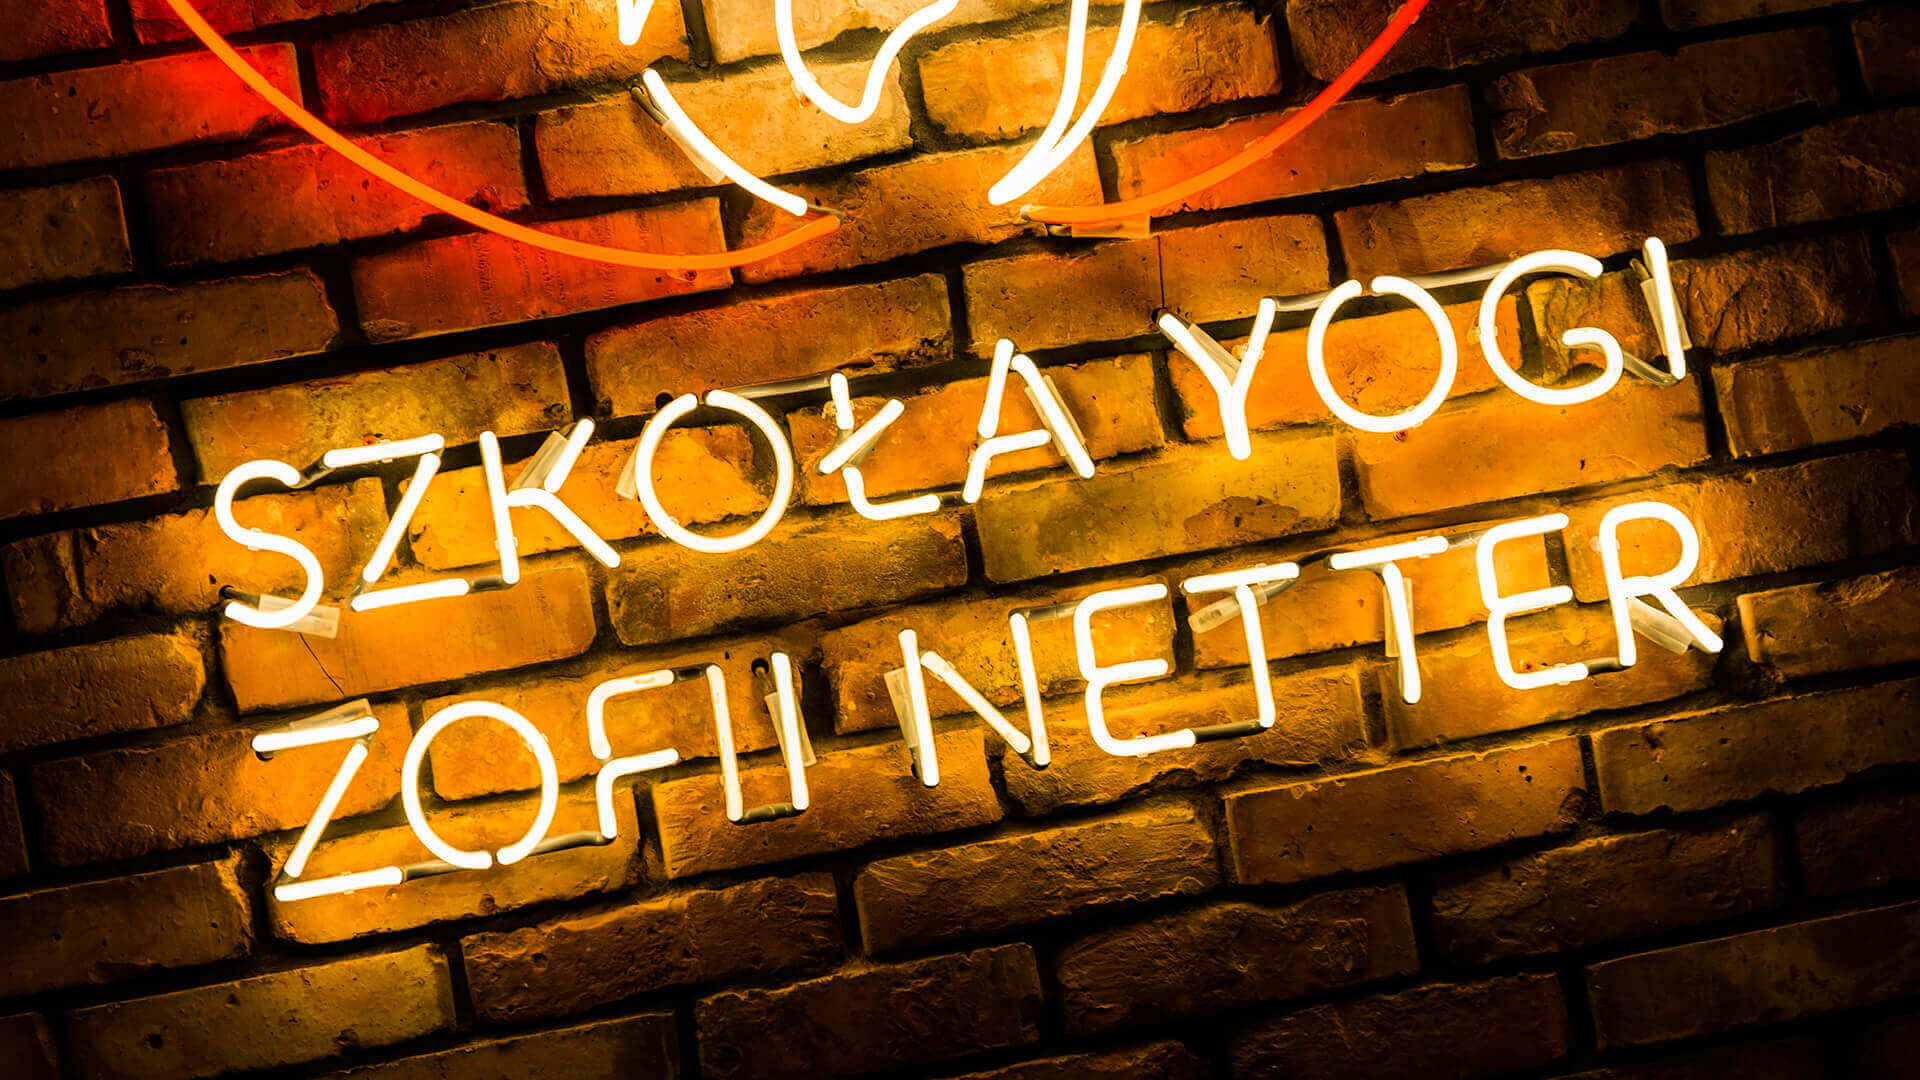 Zofia Netter Yoga School of Yoga  - szkola-yogi-zofii-netter-neon-colour-neon-light-on-the-wall-with-cegly-attached-to-the-wall-neon-in-office-letter-neon-logo-firm-neon-on-order-gdansk-przymorze (5)